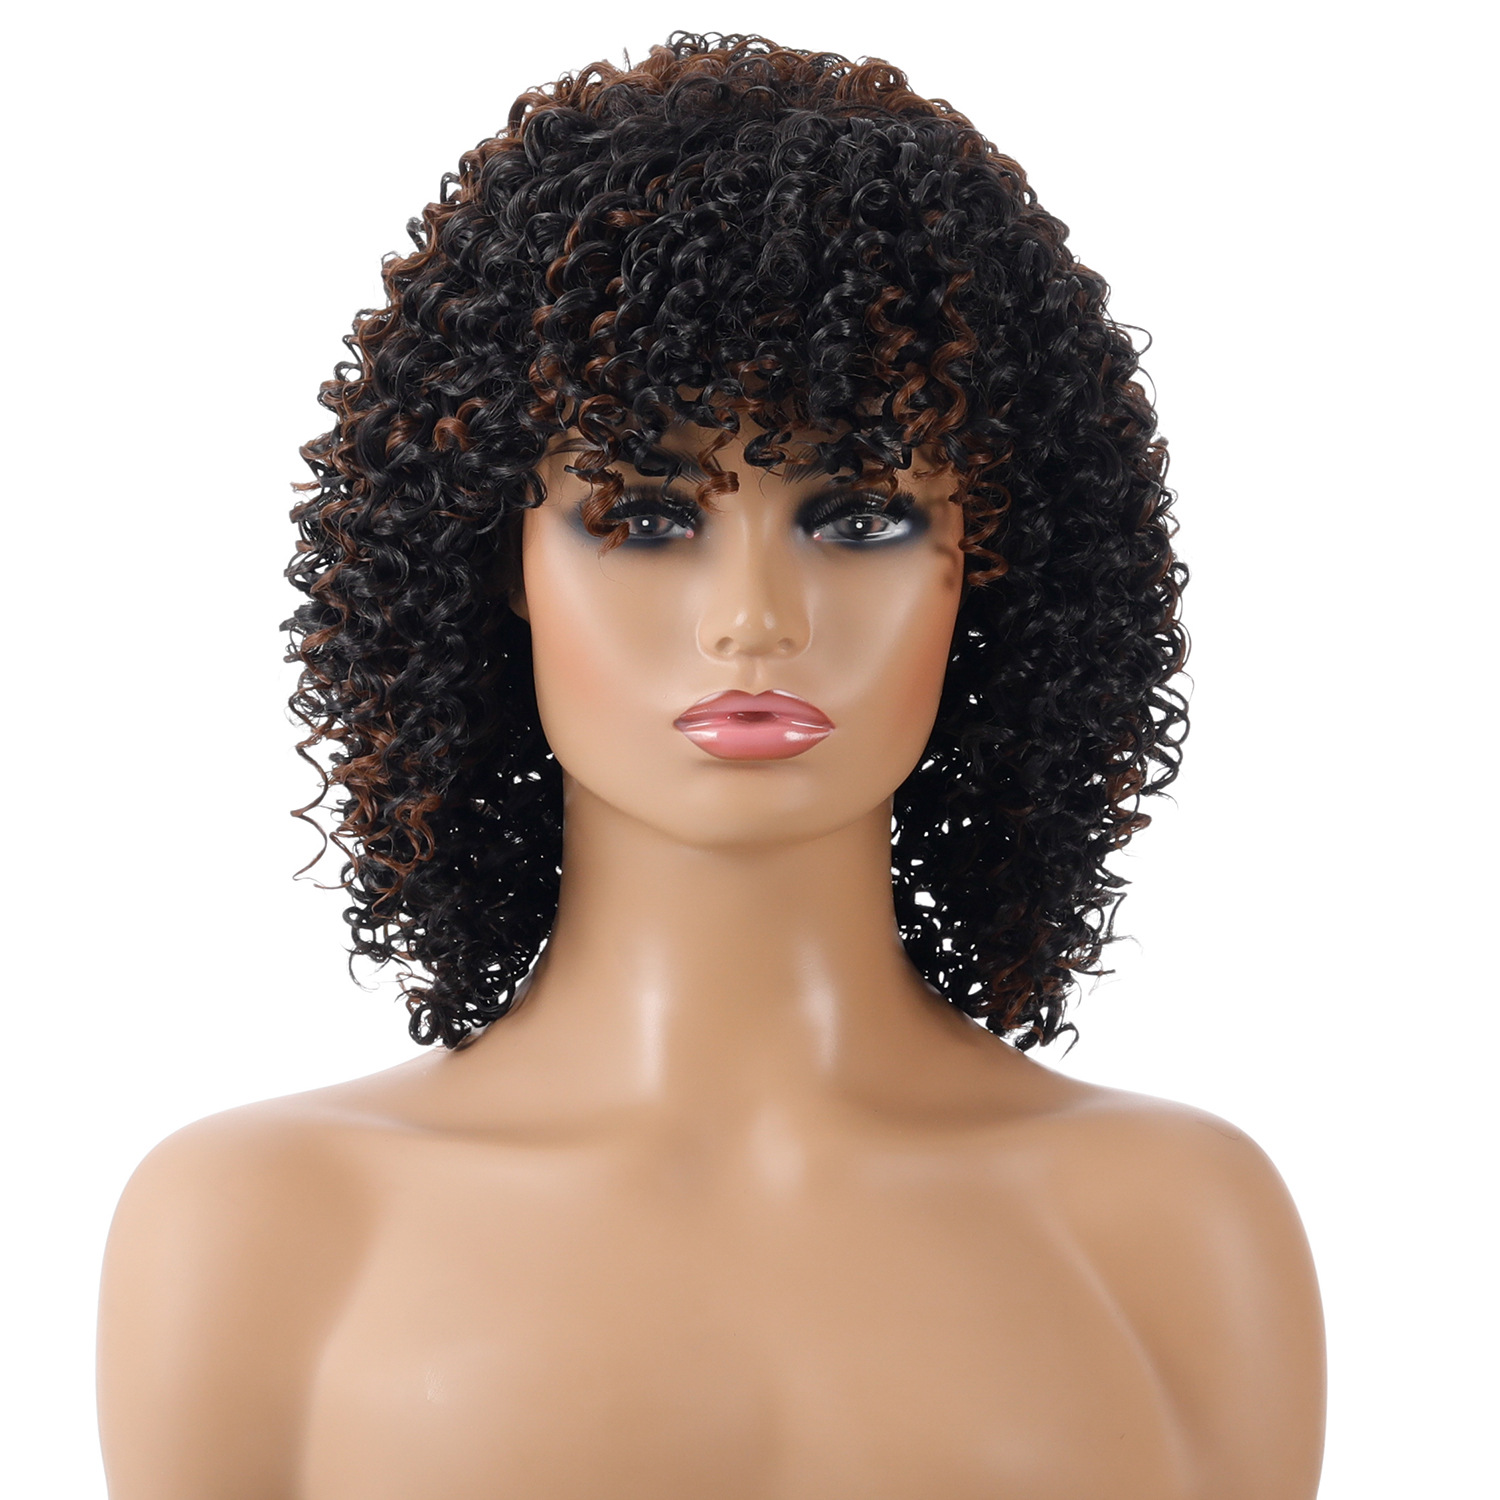 A synthetic wig featuring small curls with splashes of vibrant colors